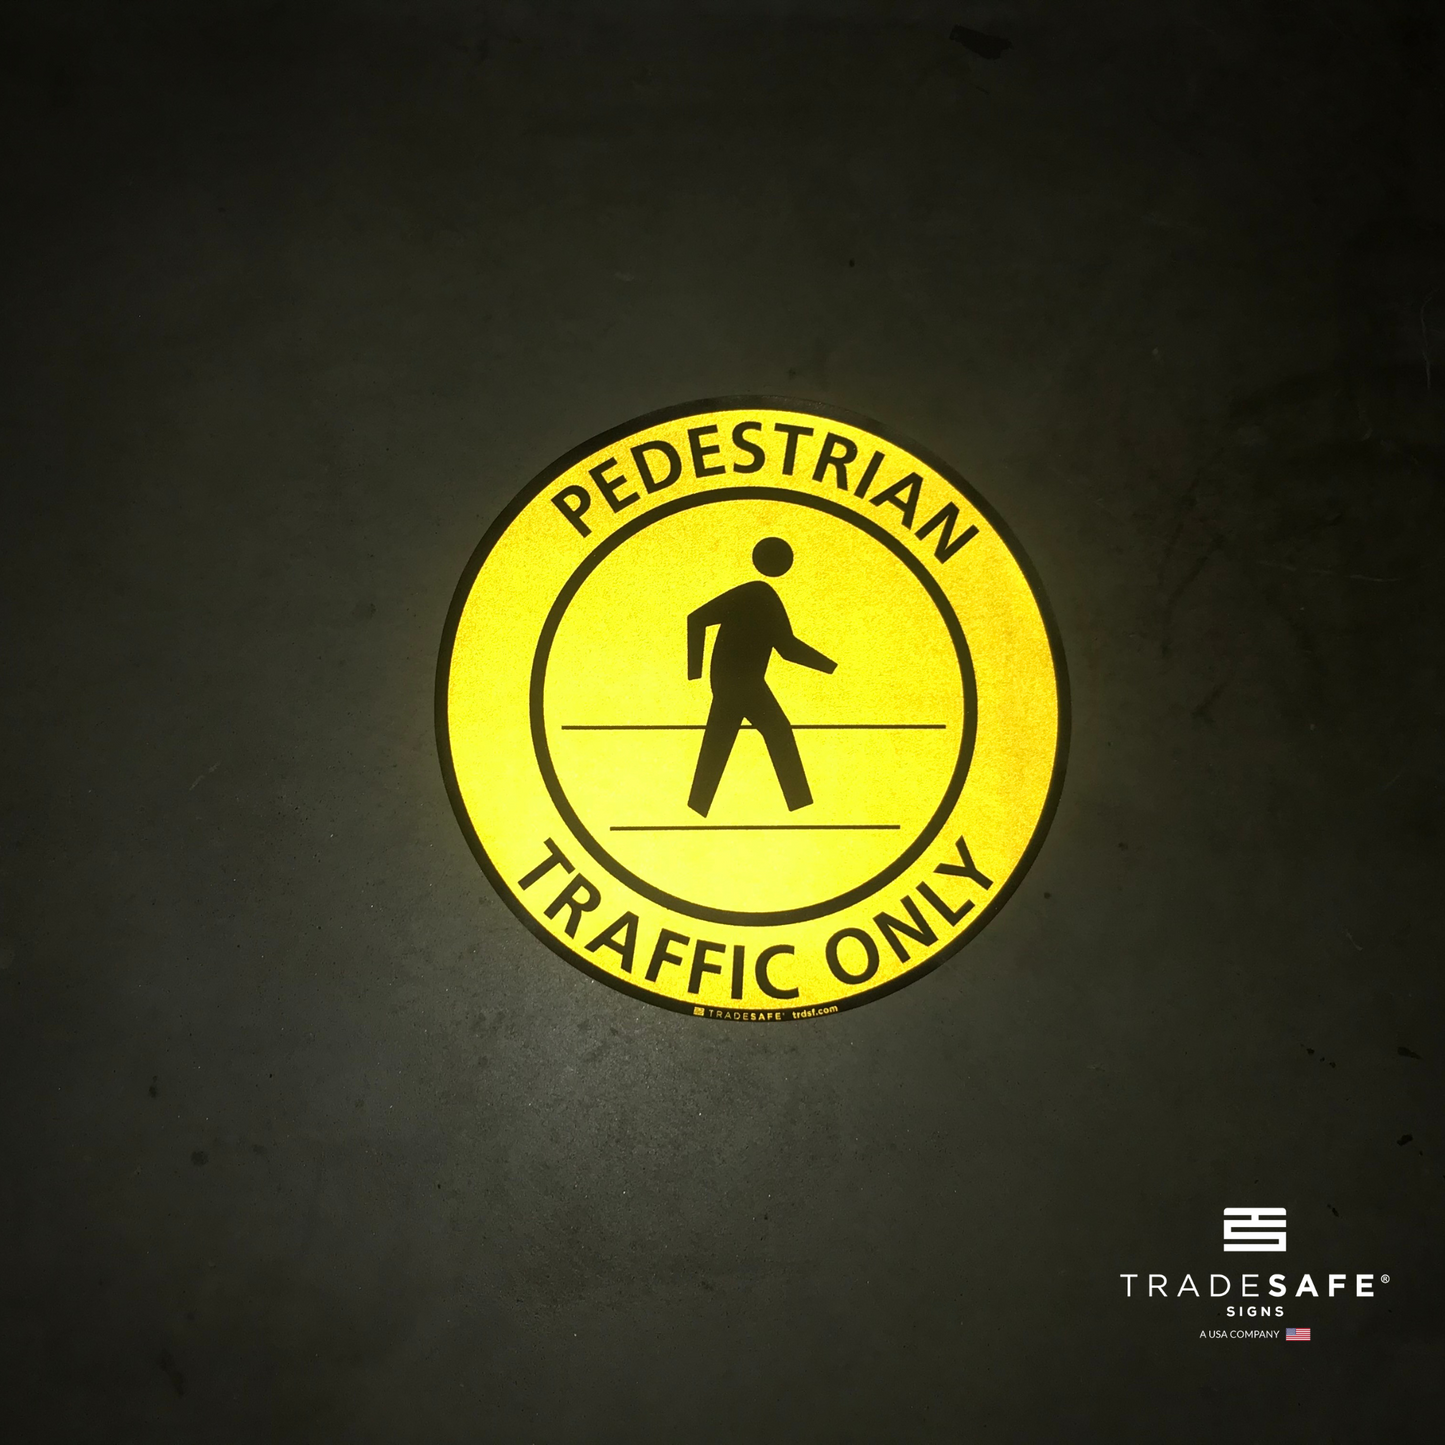 reflective attribute of adhesive vinyl "pedestrian traffic only" sign on black background